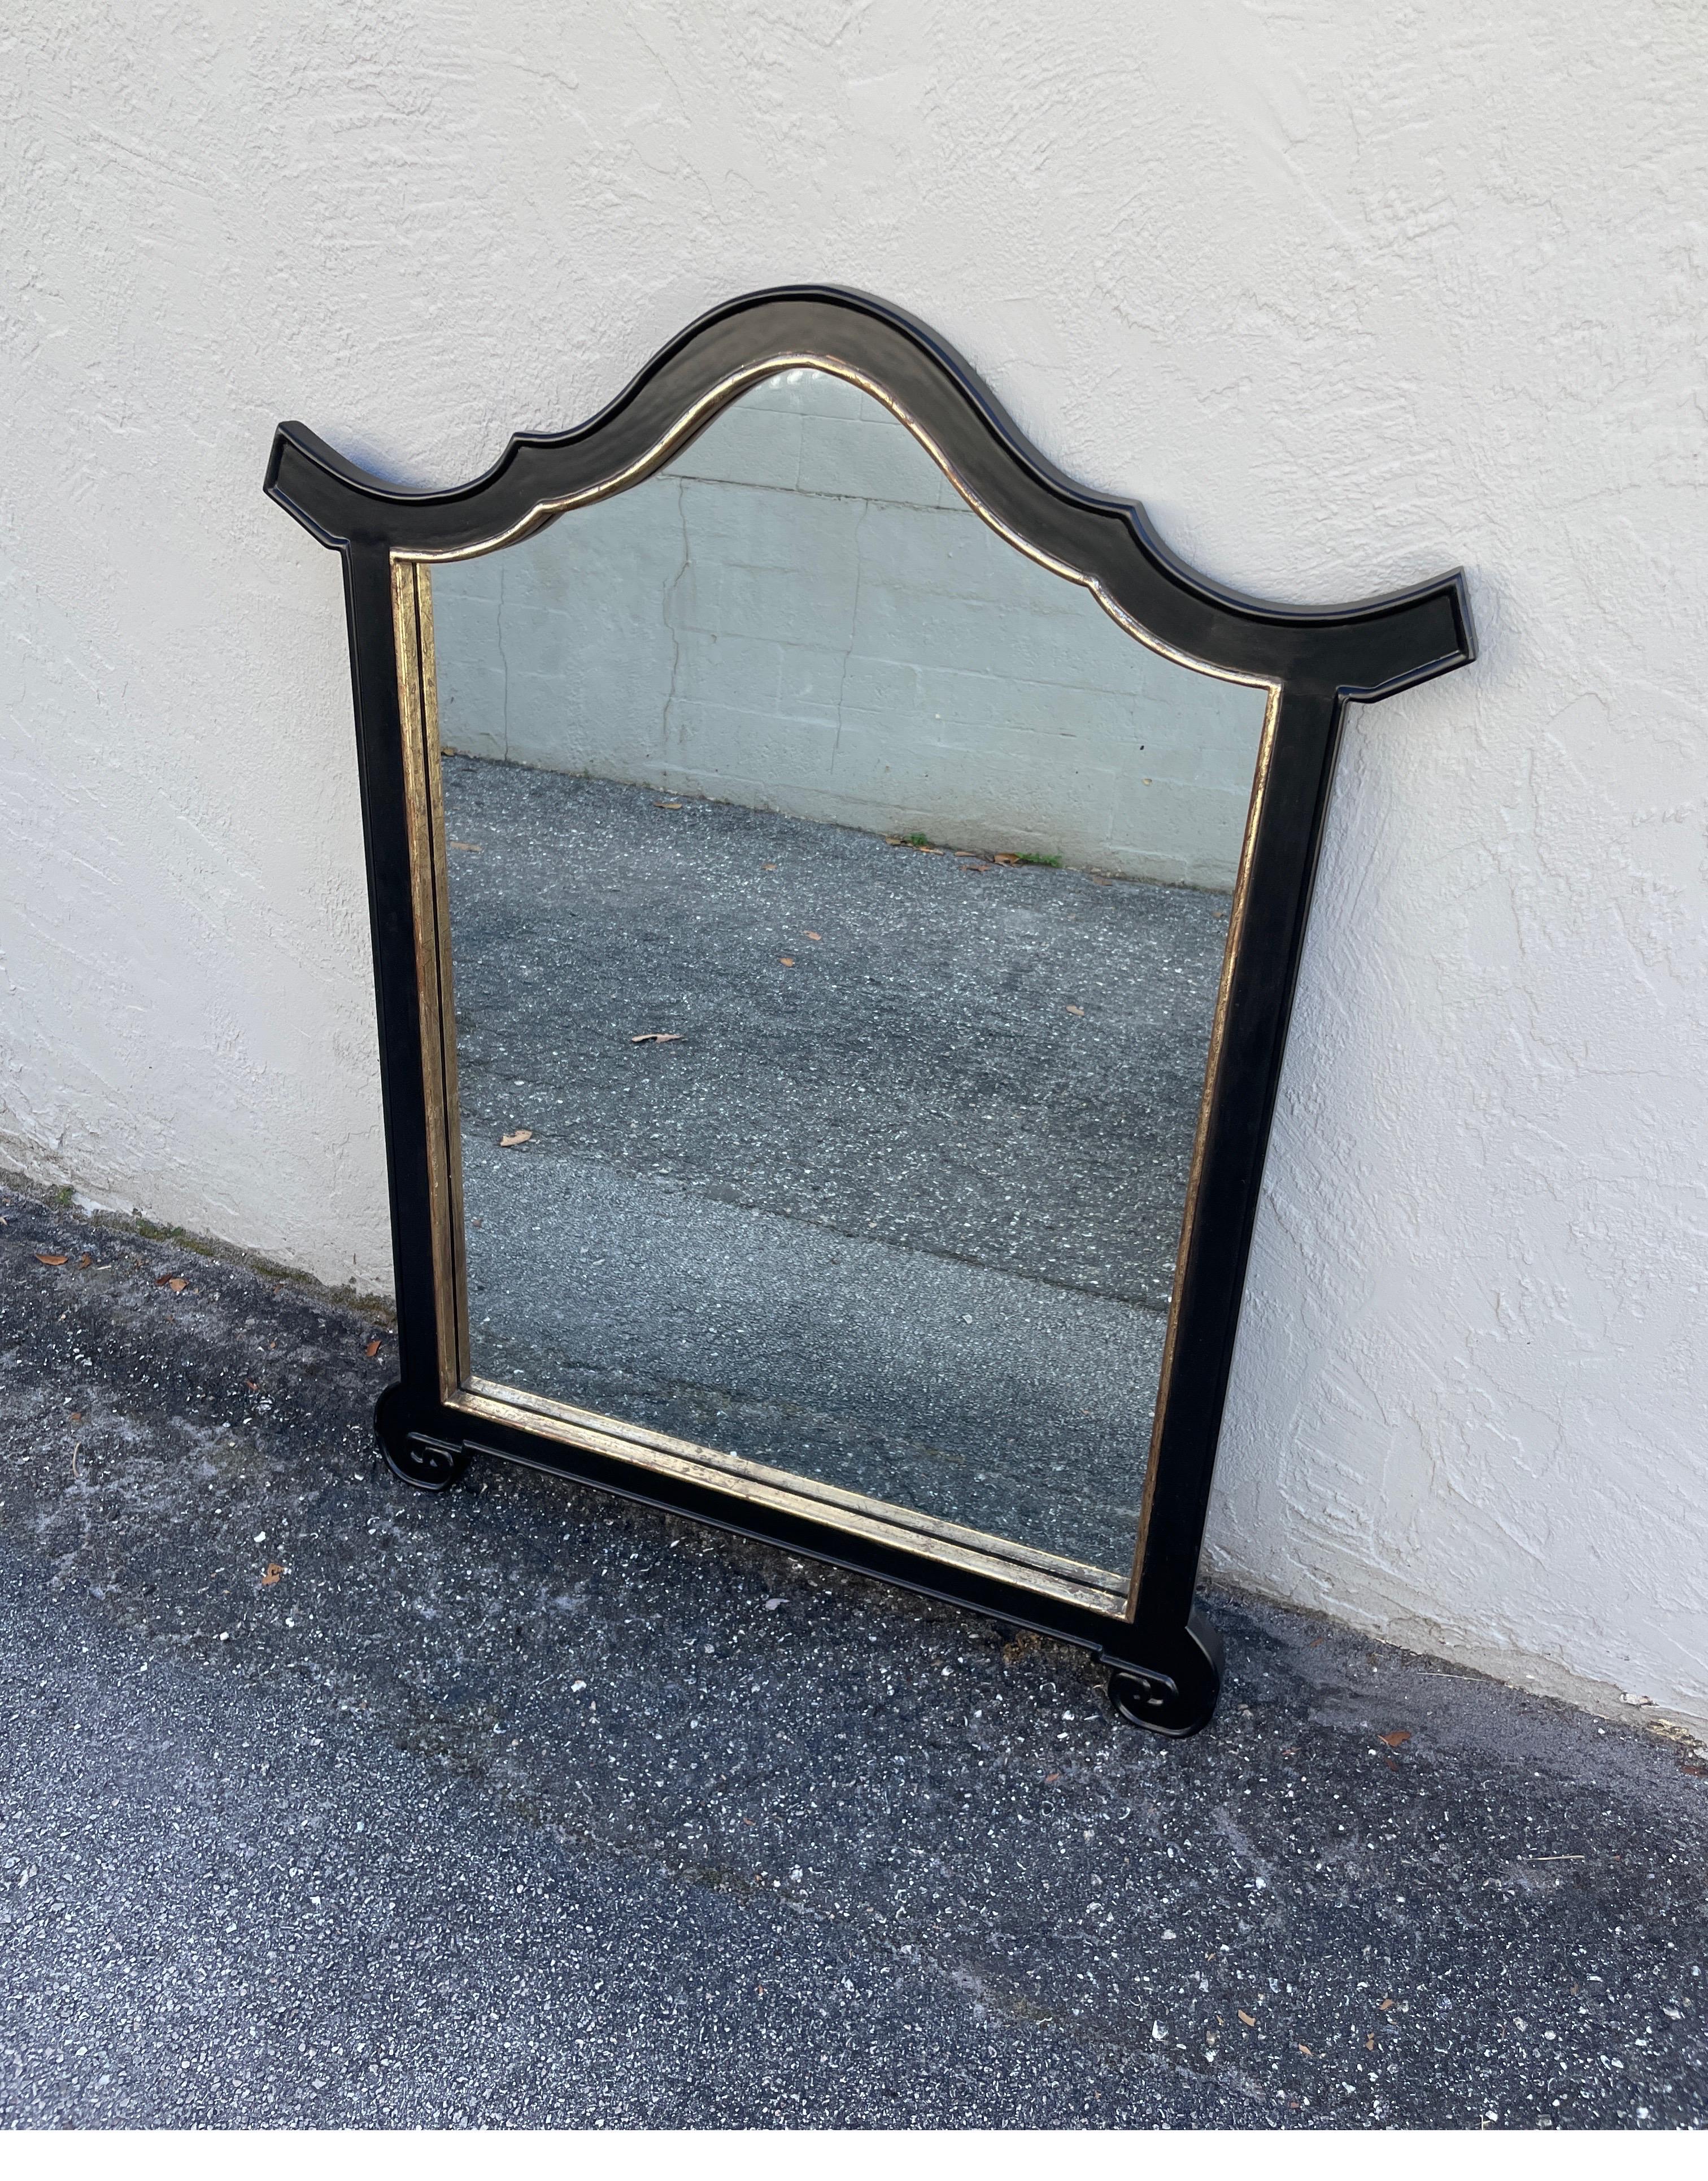 Vintage large Pagoda style wall mirror finished in black with gold trim. A very simple, yet elegant mirror.